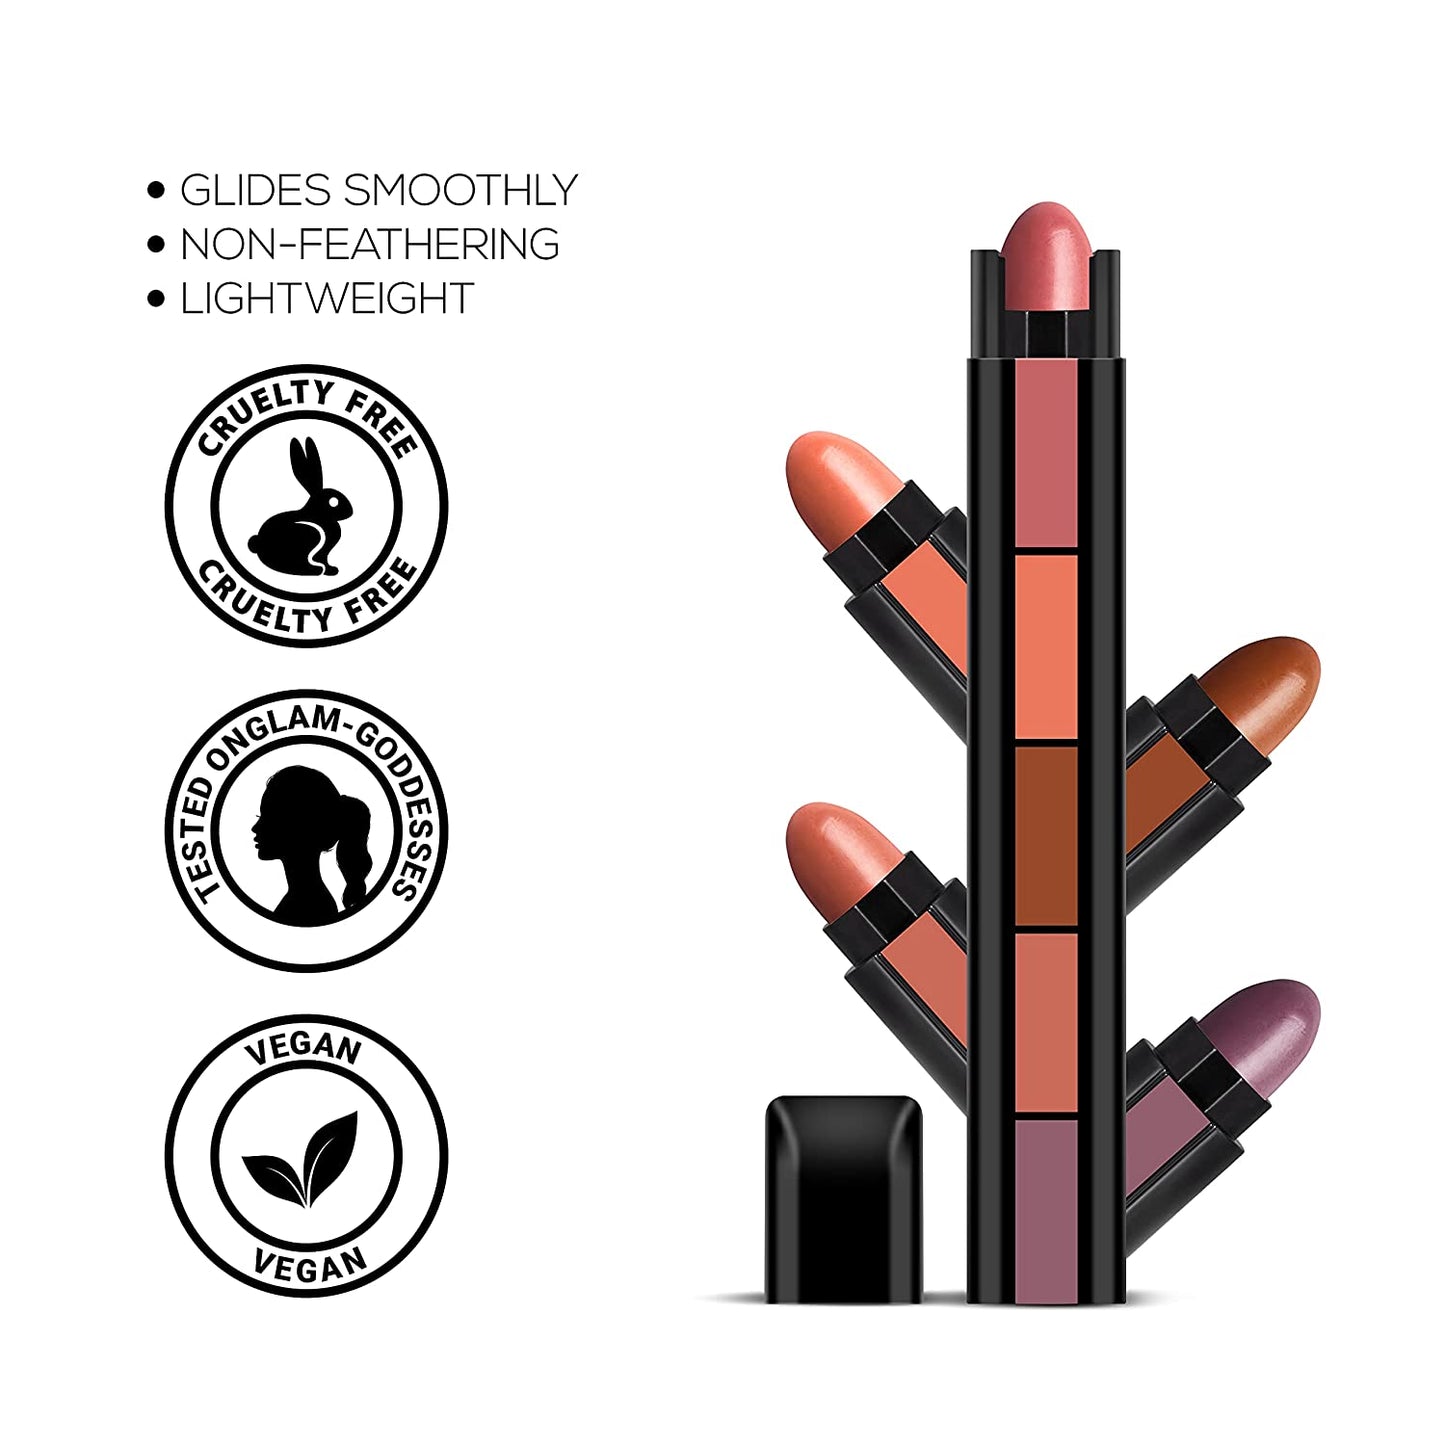 RENEE Fab 5 Nude 5-in-1 Lipstick 7.5gm, Long Lasting Matte Finish | Five Shades In One | Intense Color Payoff | Lip Color with Moisturizing Benefits